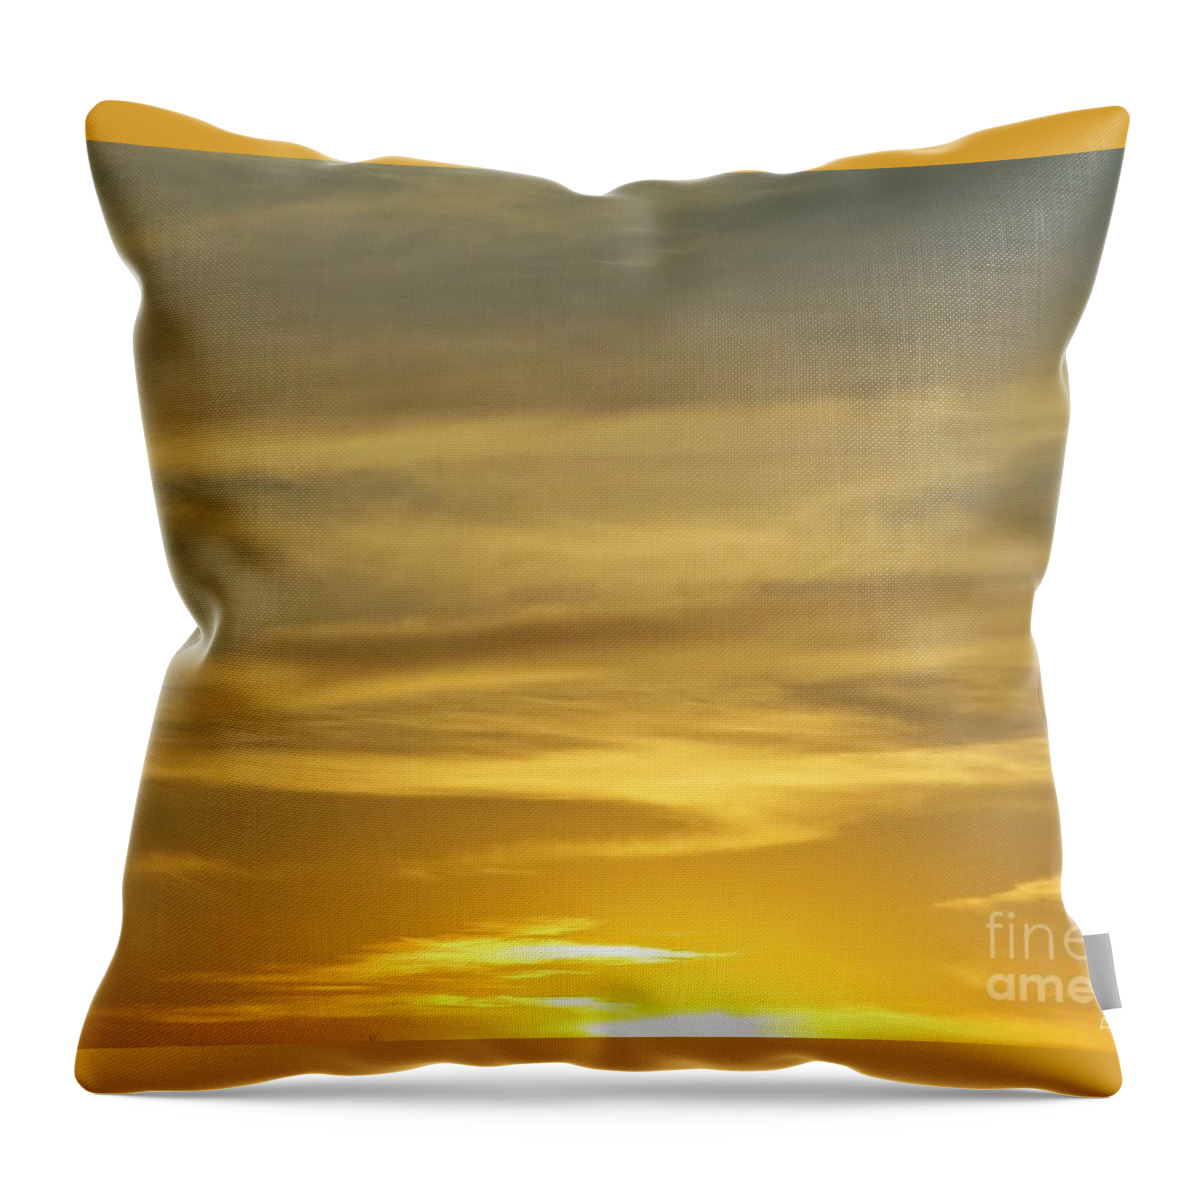 Sky. Clouds Throw Pillow featuring the photograph Sunset Sky by Leanne Seymour